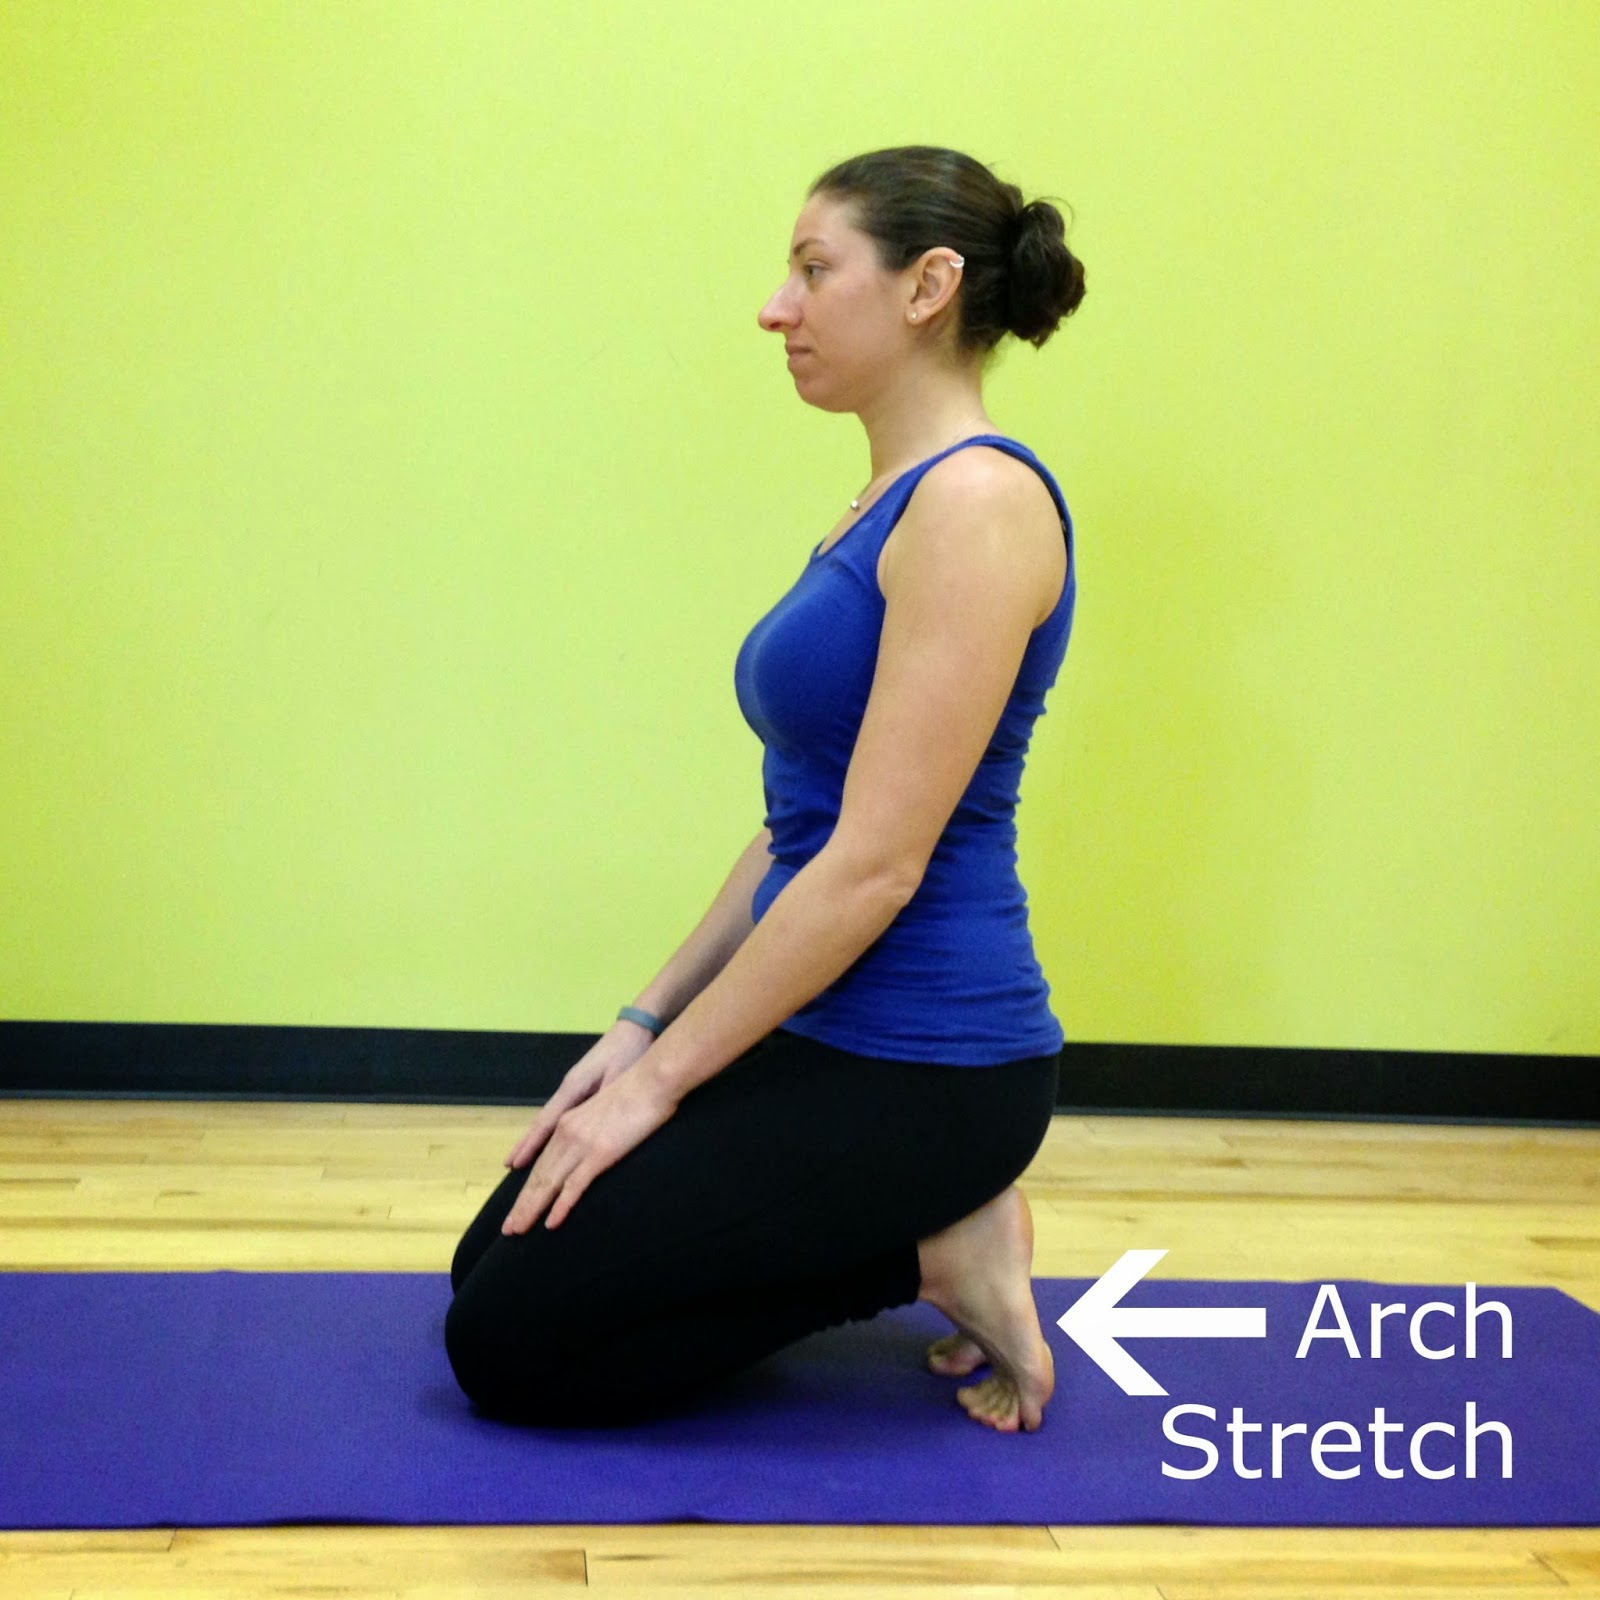 4 Beginner Yoga Poses for Those with Scoliosis | Spine-health